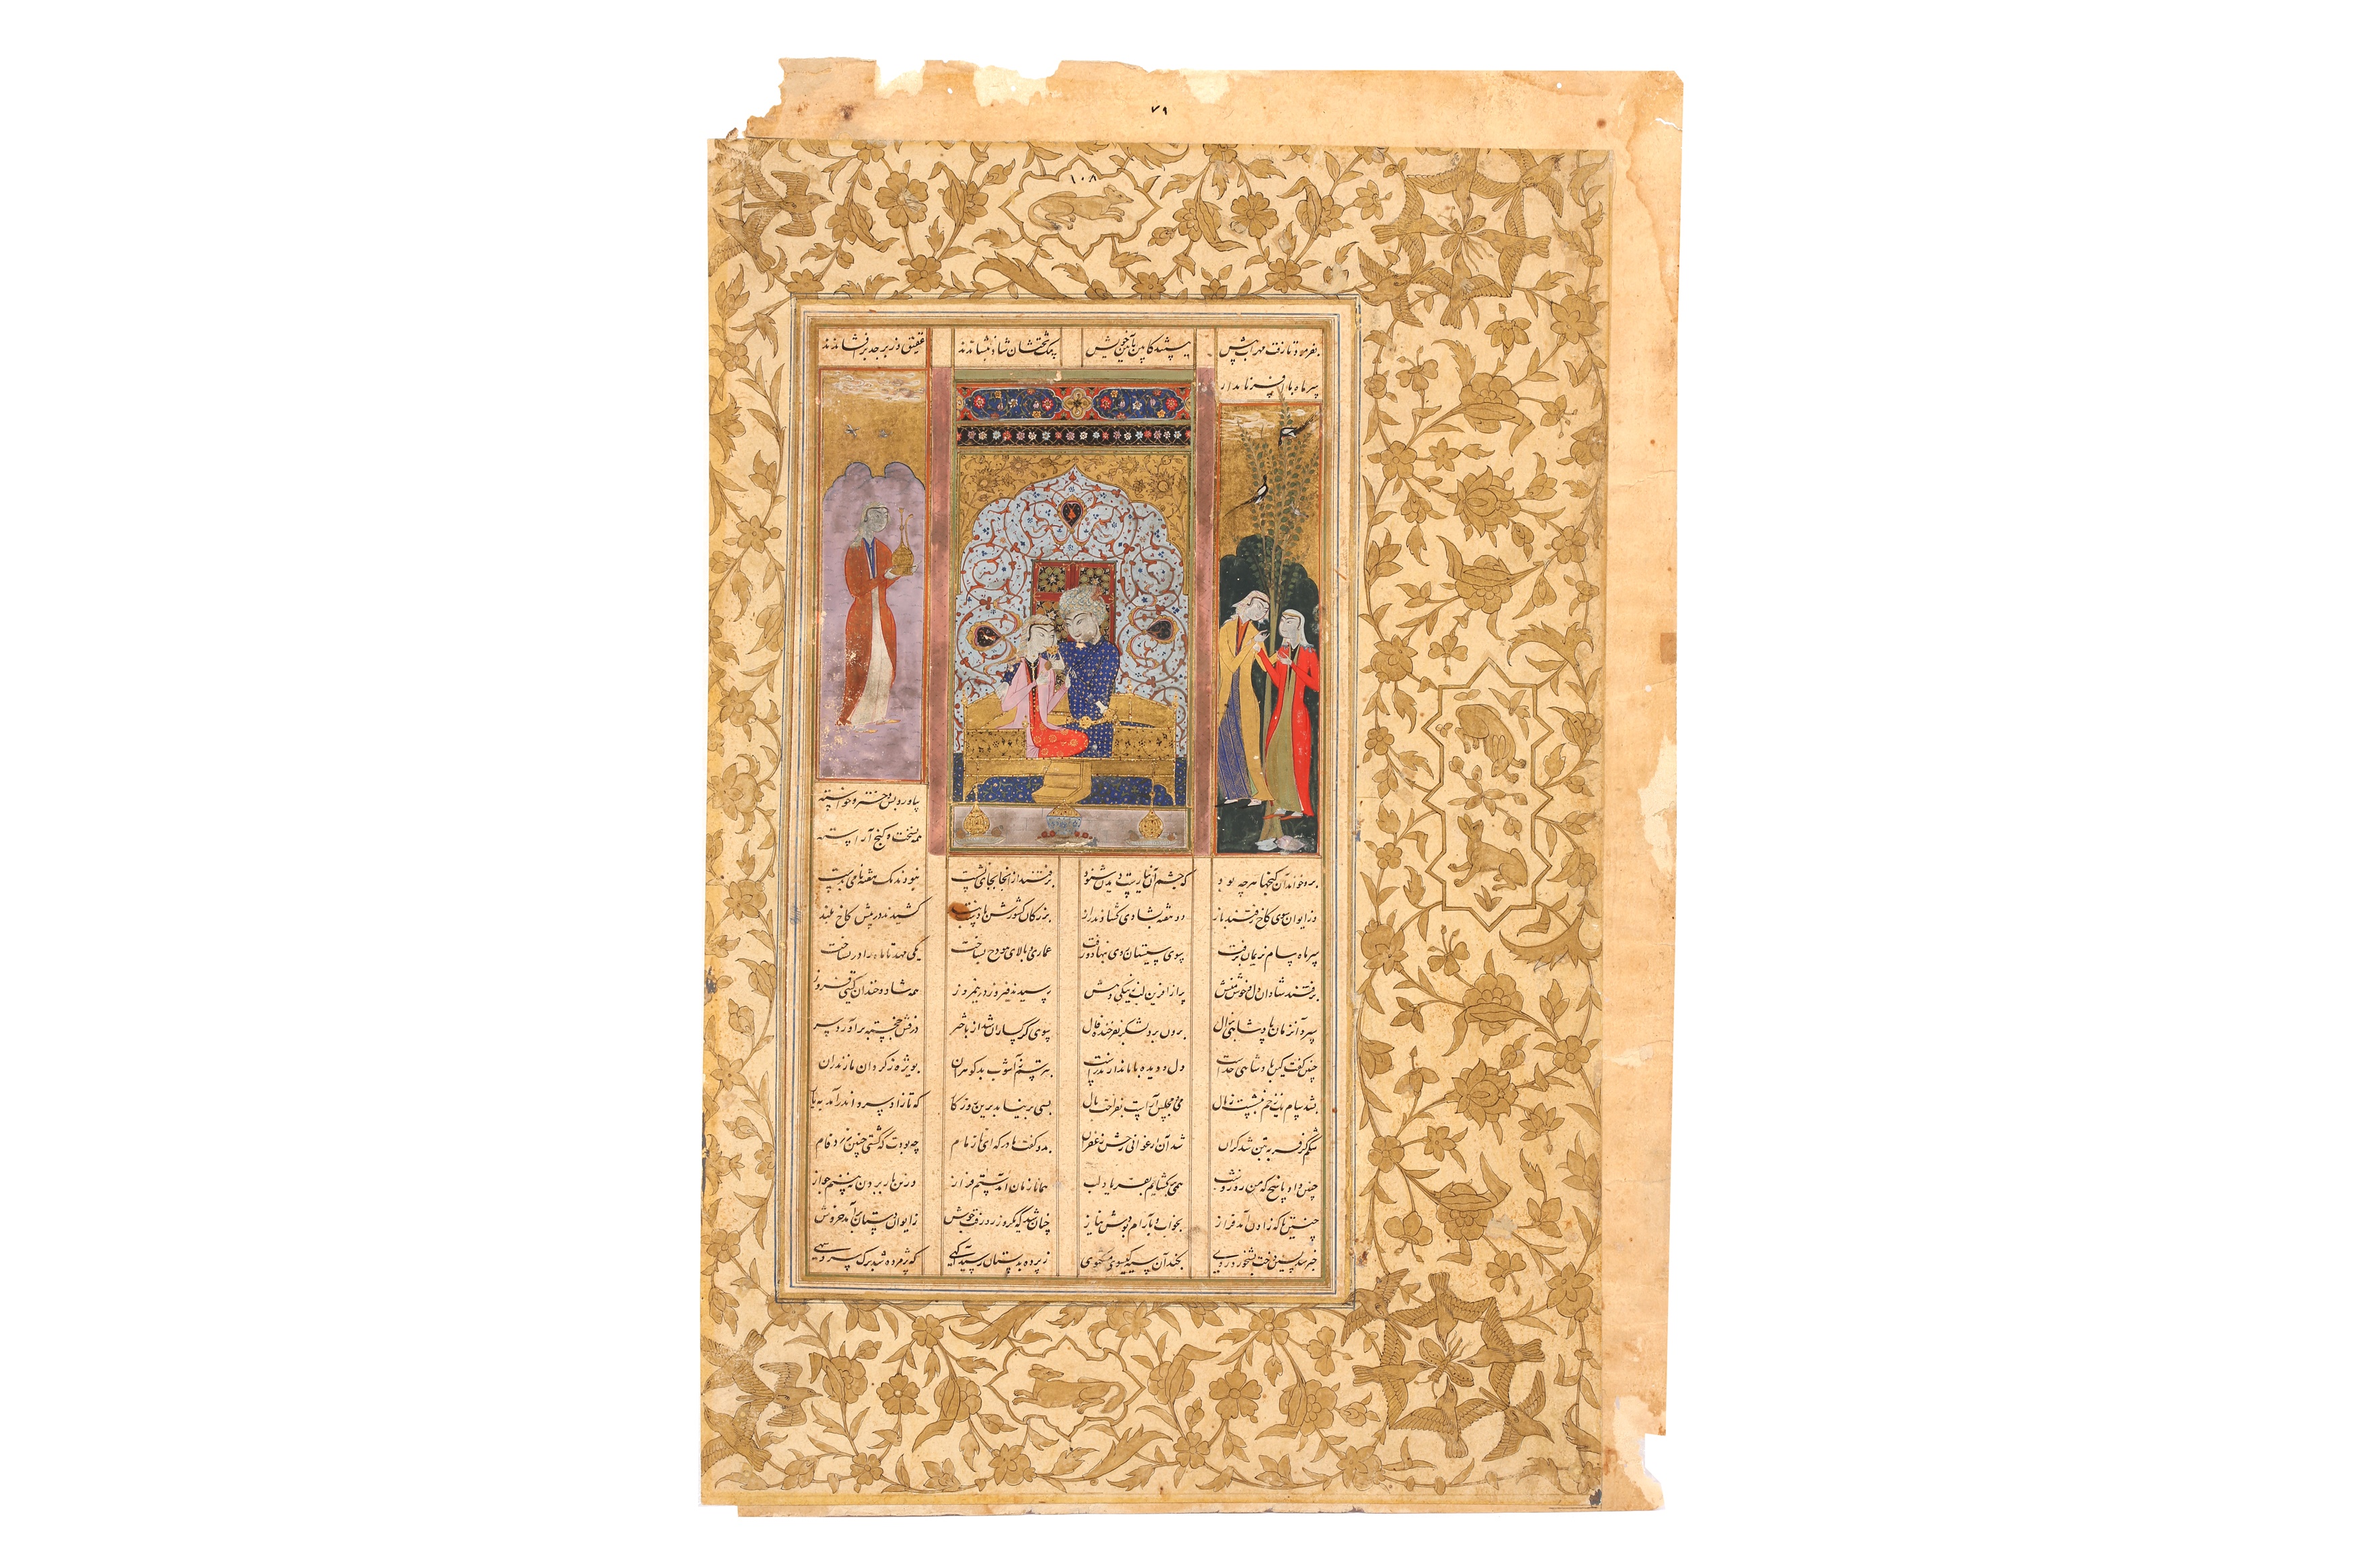 AN ILLUSTRATED LOOSE FOLIO FROM A SHAHNAMA: MEHRAB AND HIS WIFE SINDOKHT ON A THRONE